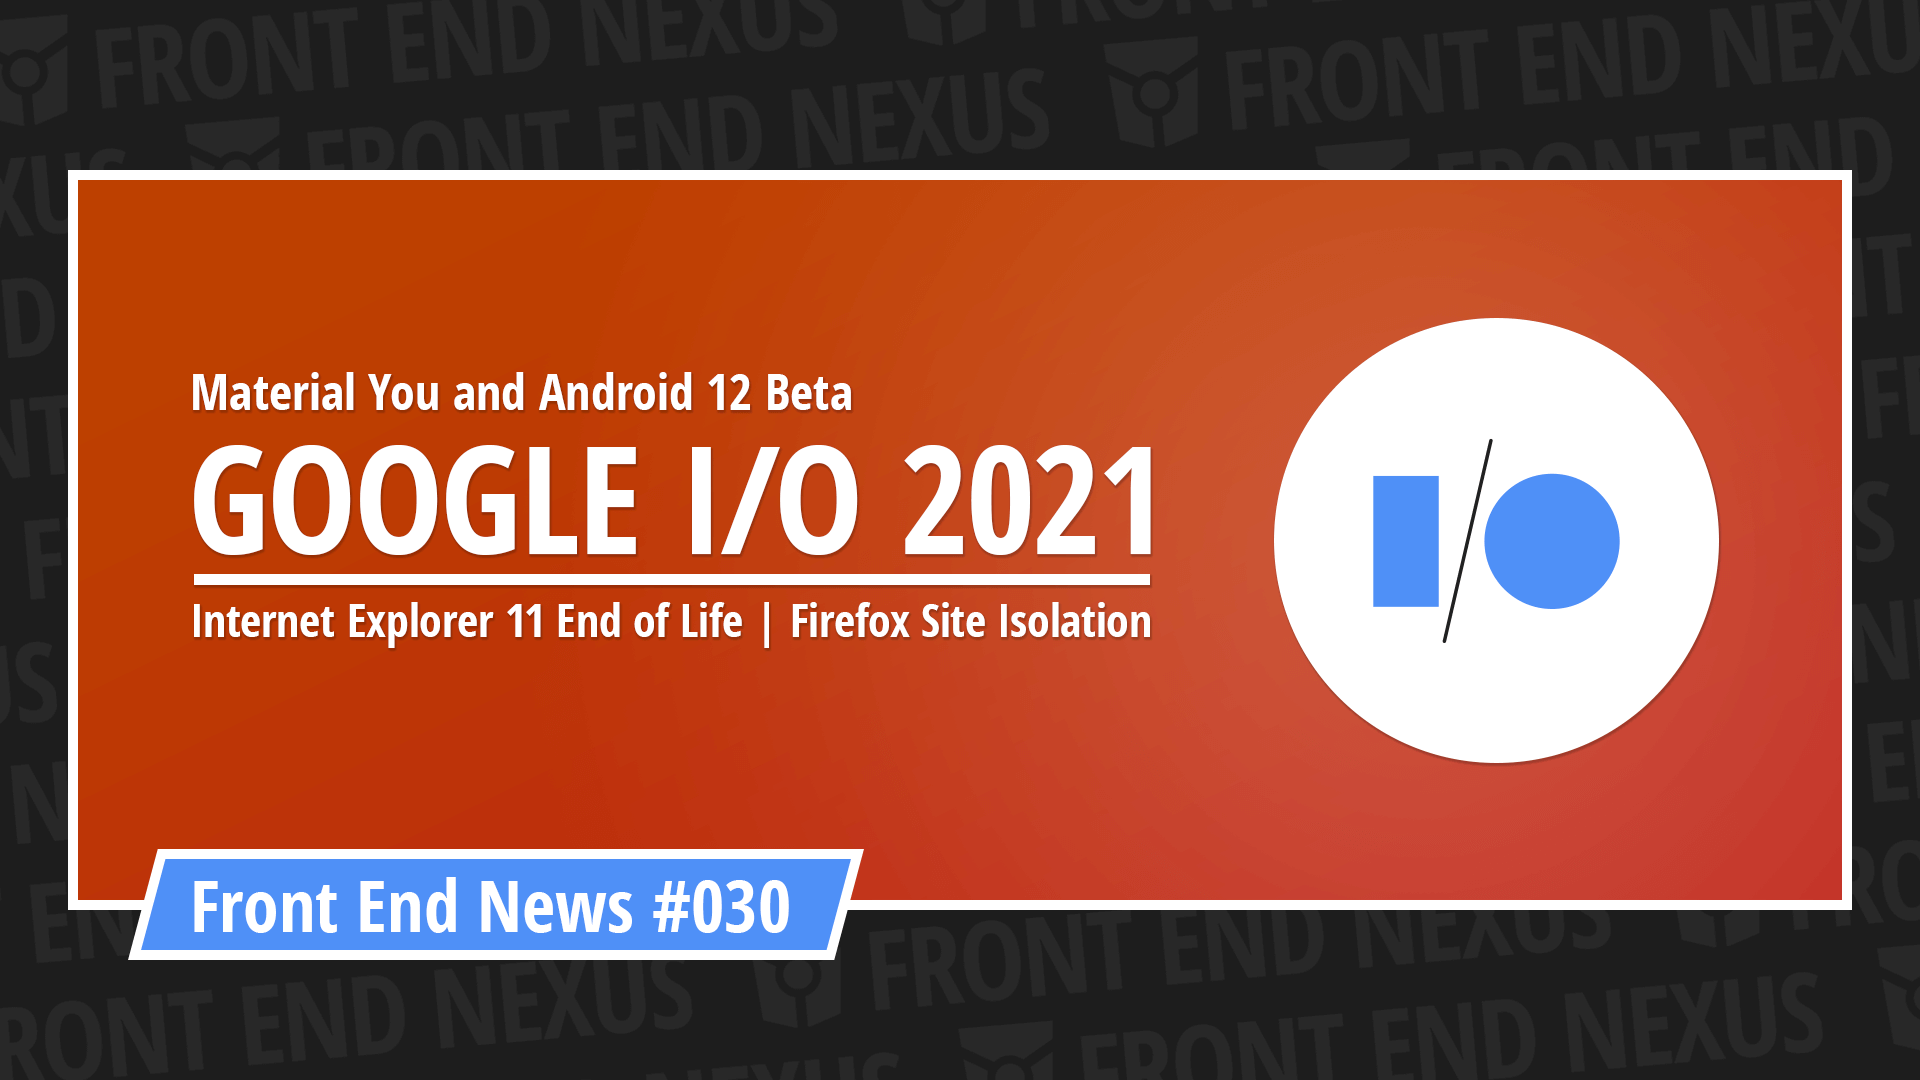 Material You and Android 12 Beta from Google I/O, the end of IE11, and Firefox Site Isolation | Front End News #030